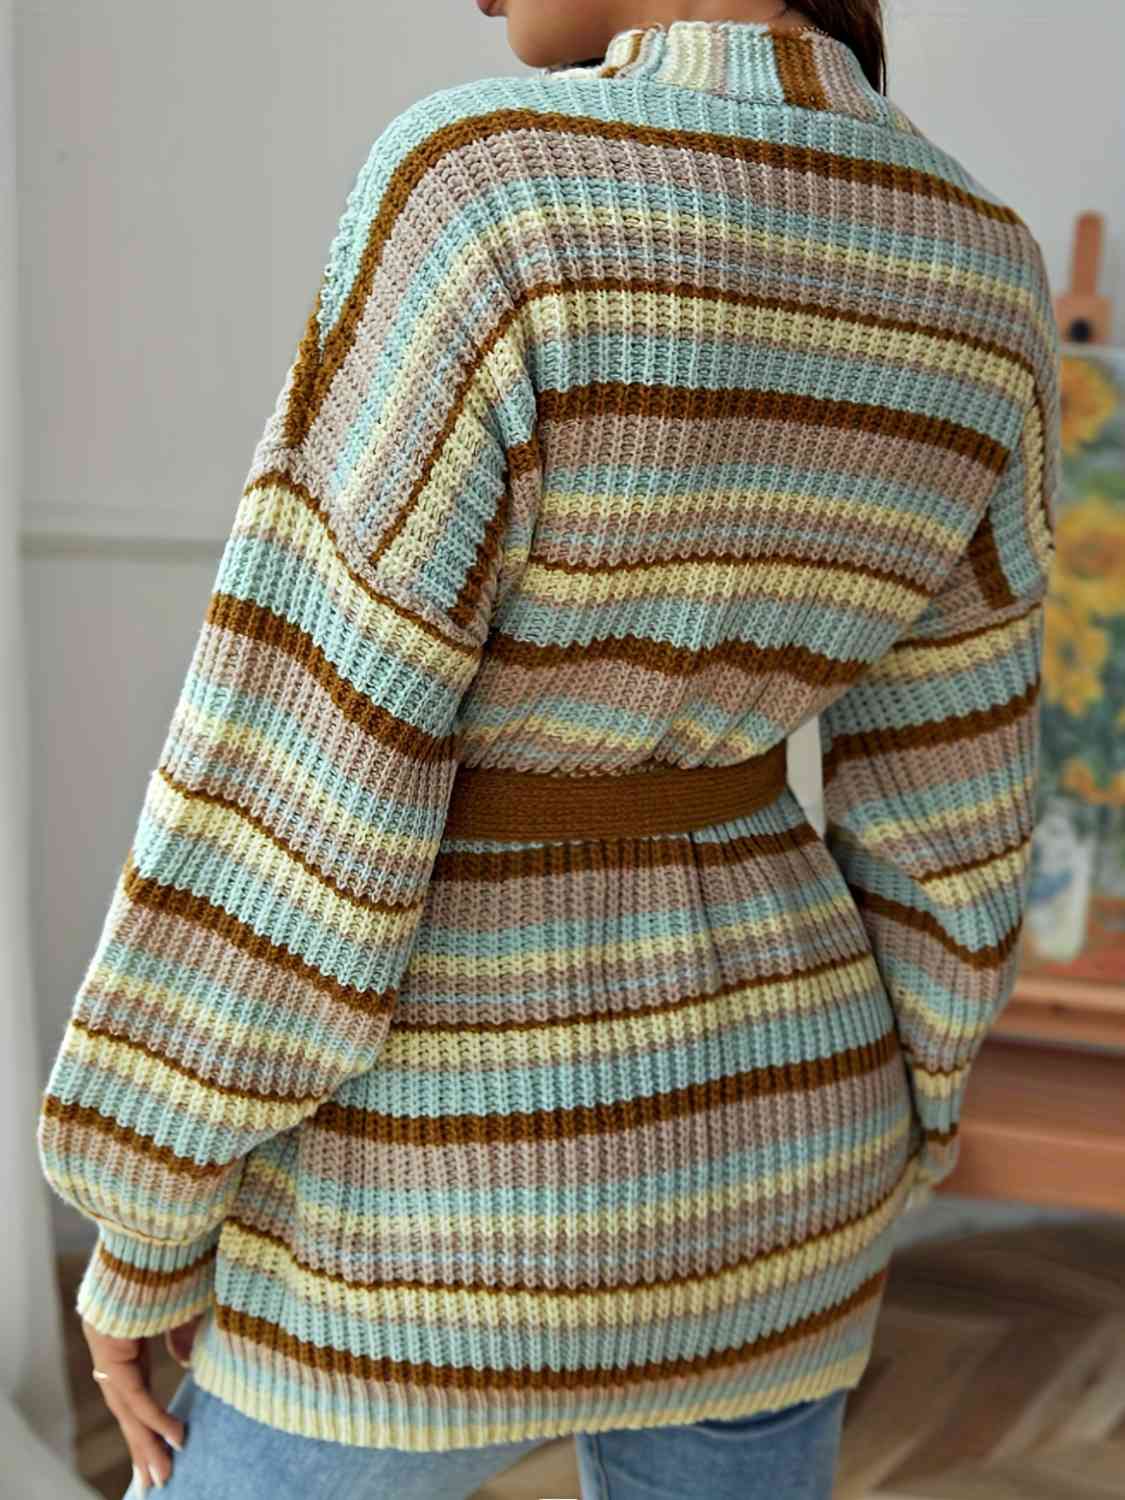 Striped Open Front Long Sleeve Cardigan